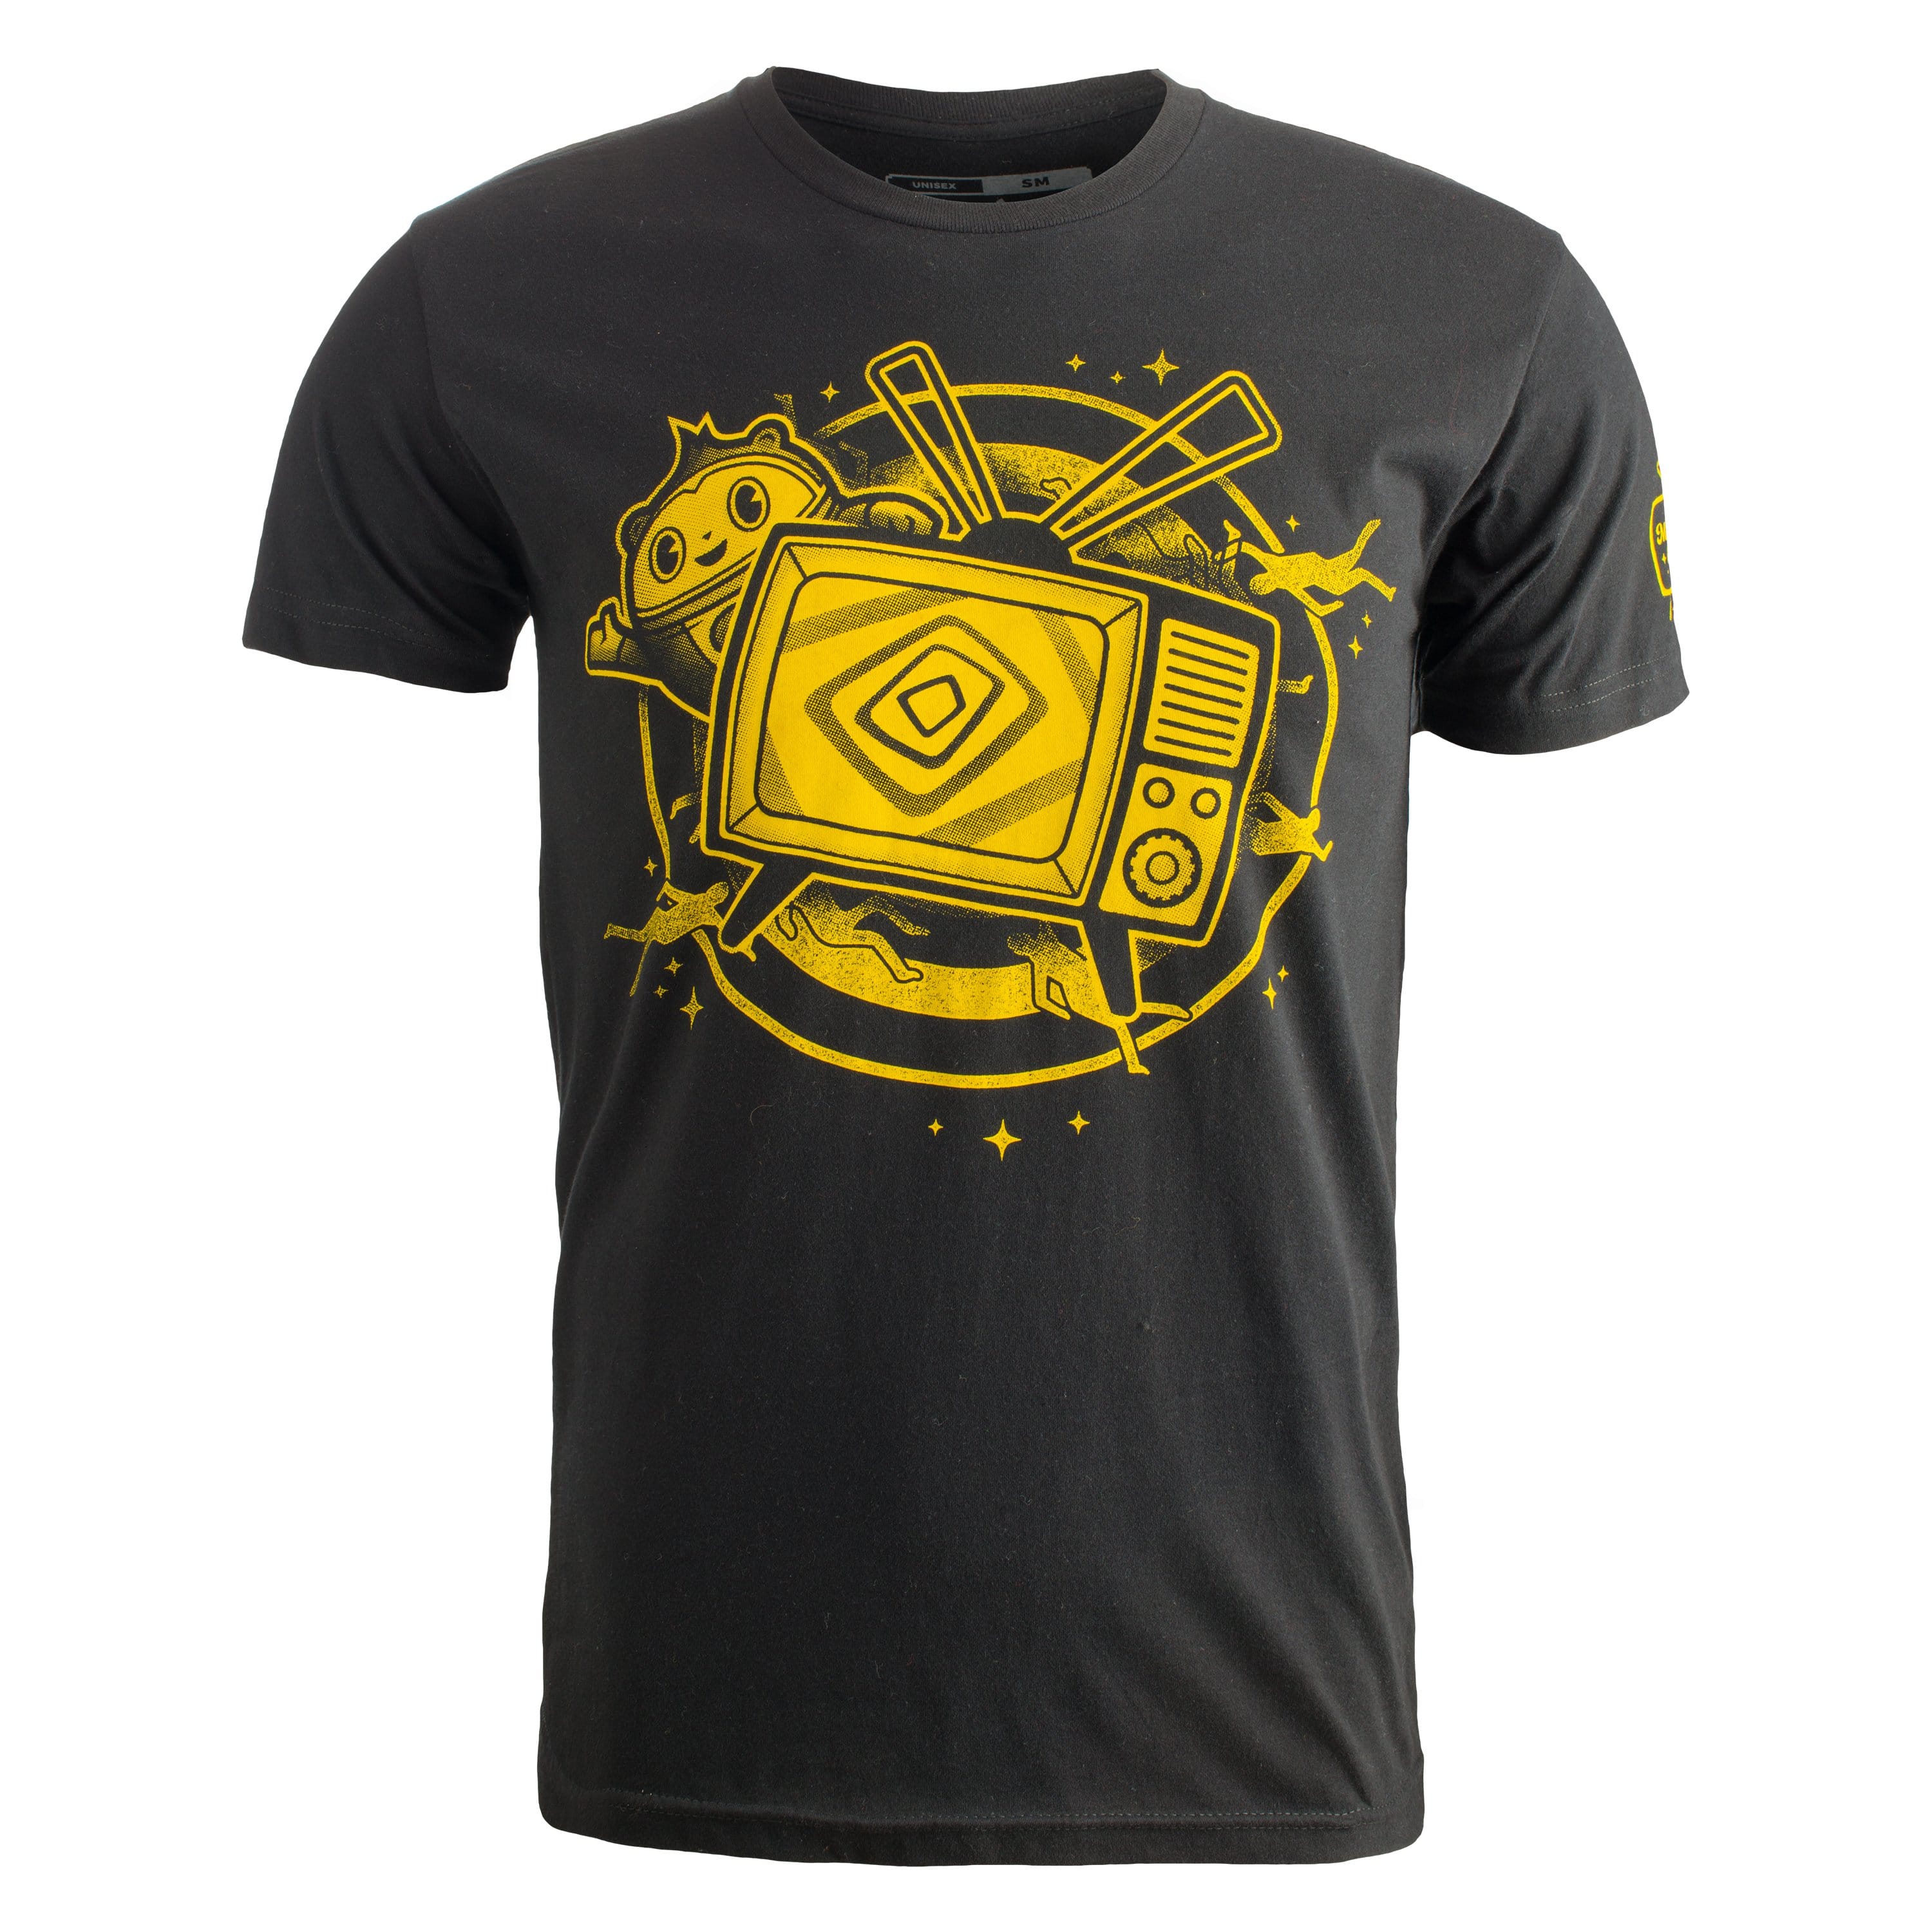 Persona 4 - Midnight Channel 100% Cotton T-shirt